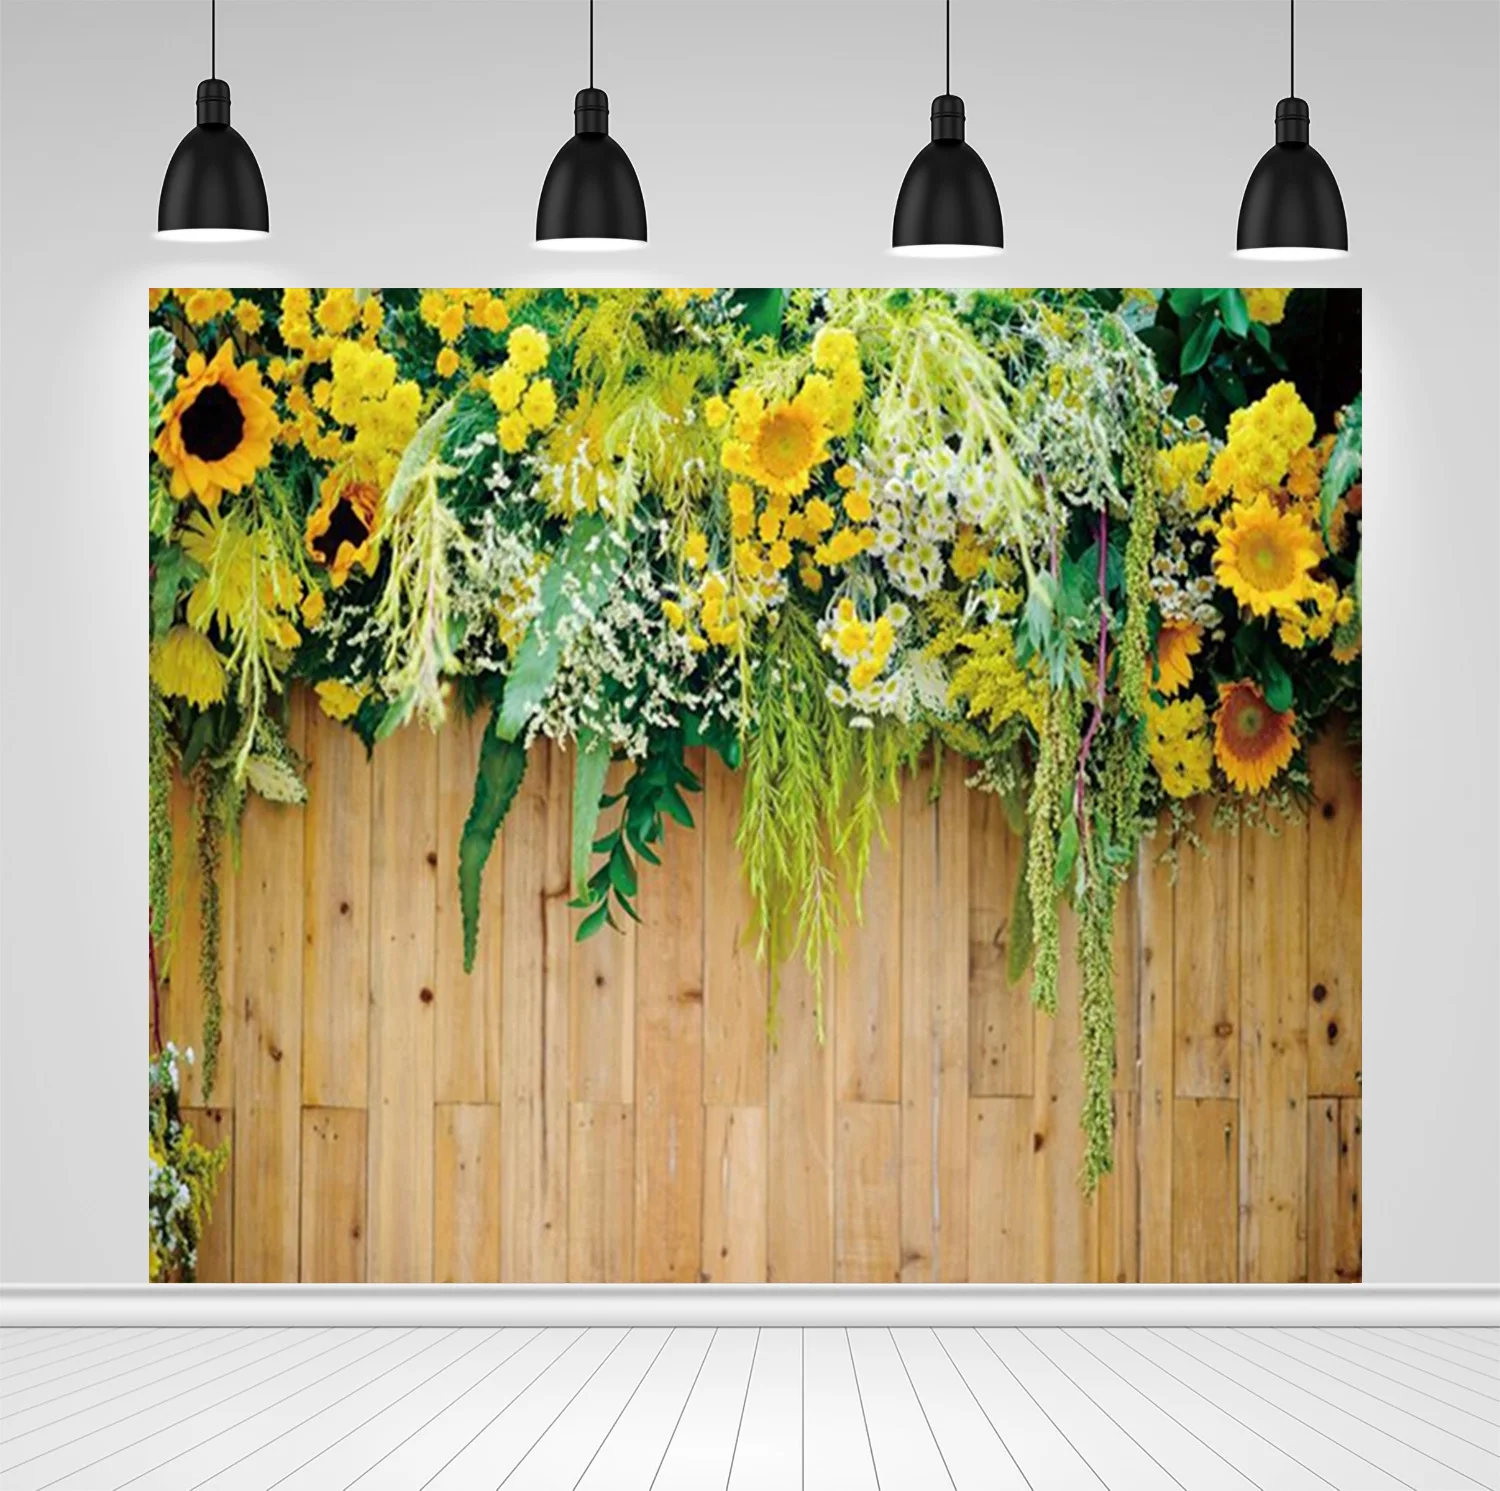 

Scopiso Wooden Board Sunflowers Blooming Plants Baby Portrait Photography Backdrops Photo Backgrounds Birthday Wedding Photocall